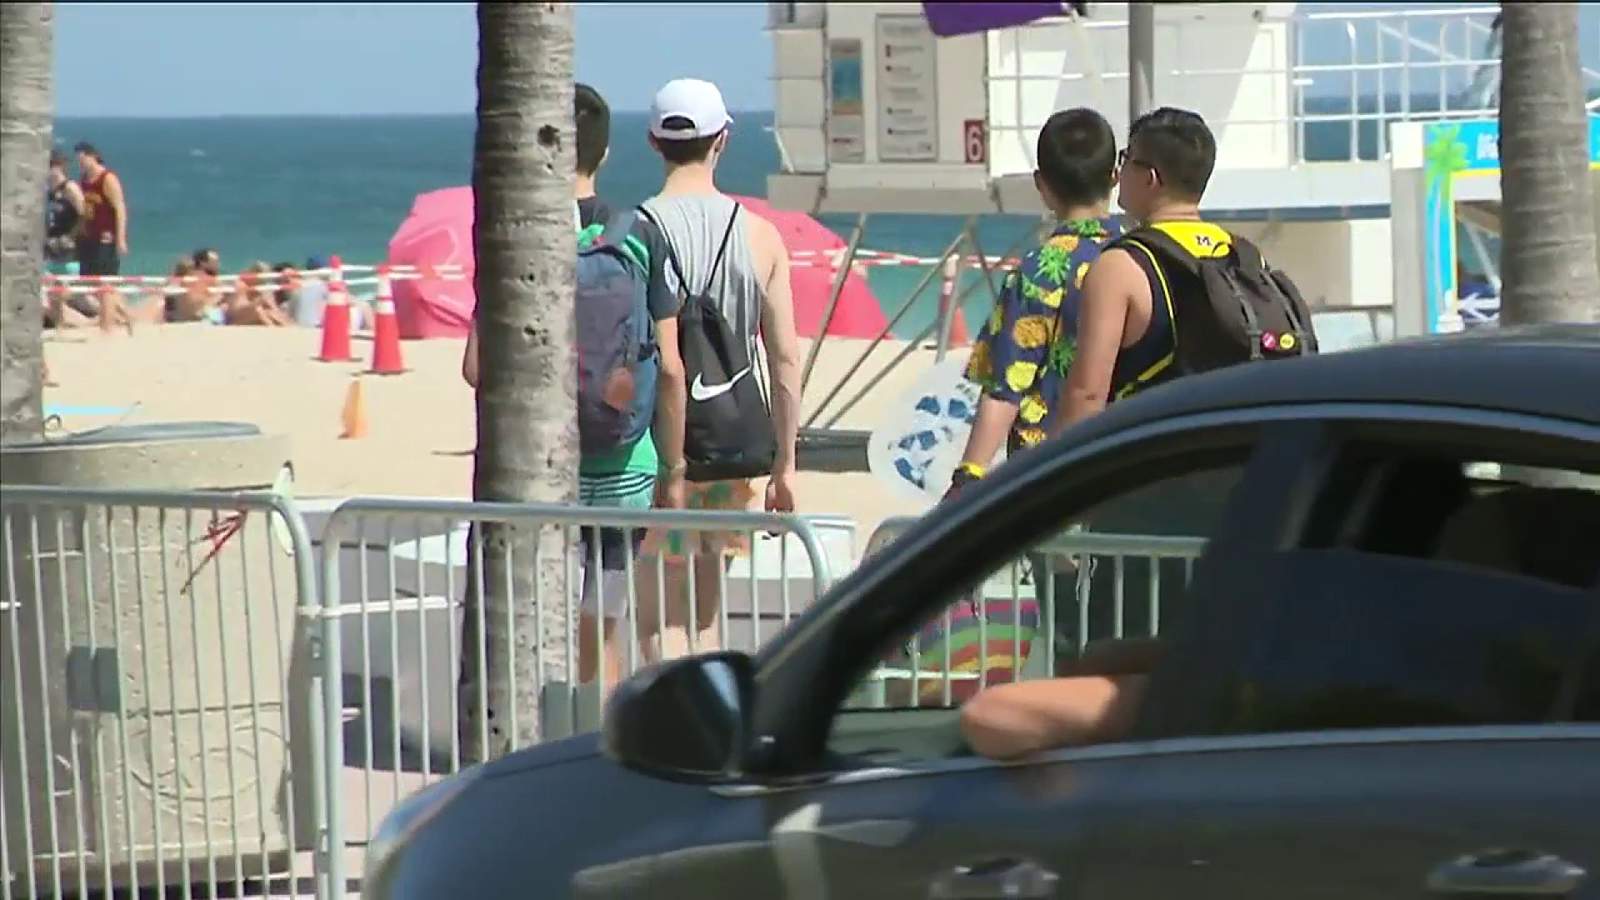 Fort Lauderdale police get ready for spring break crowds